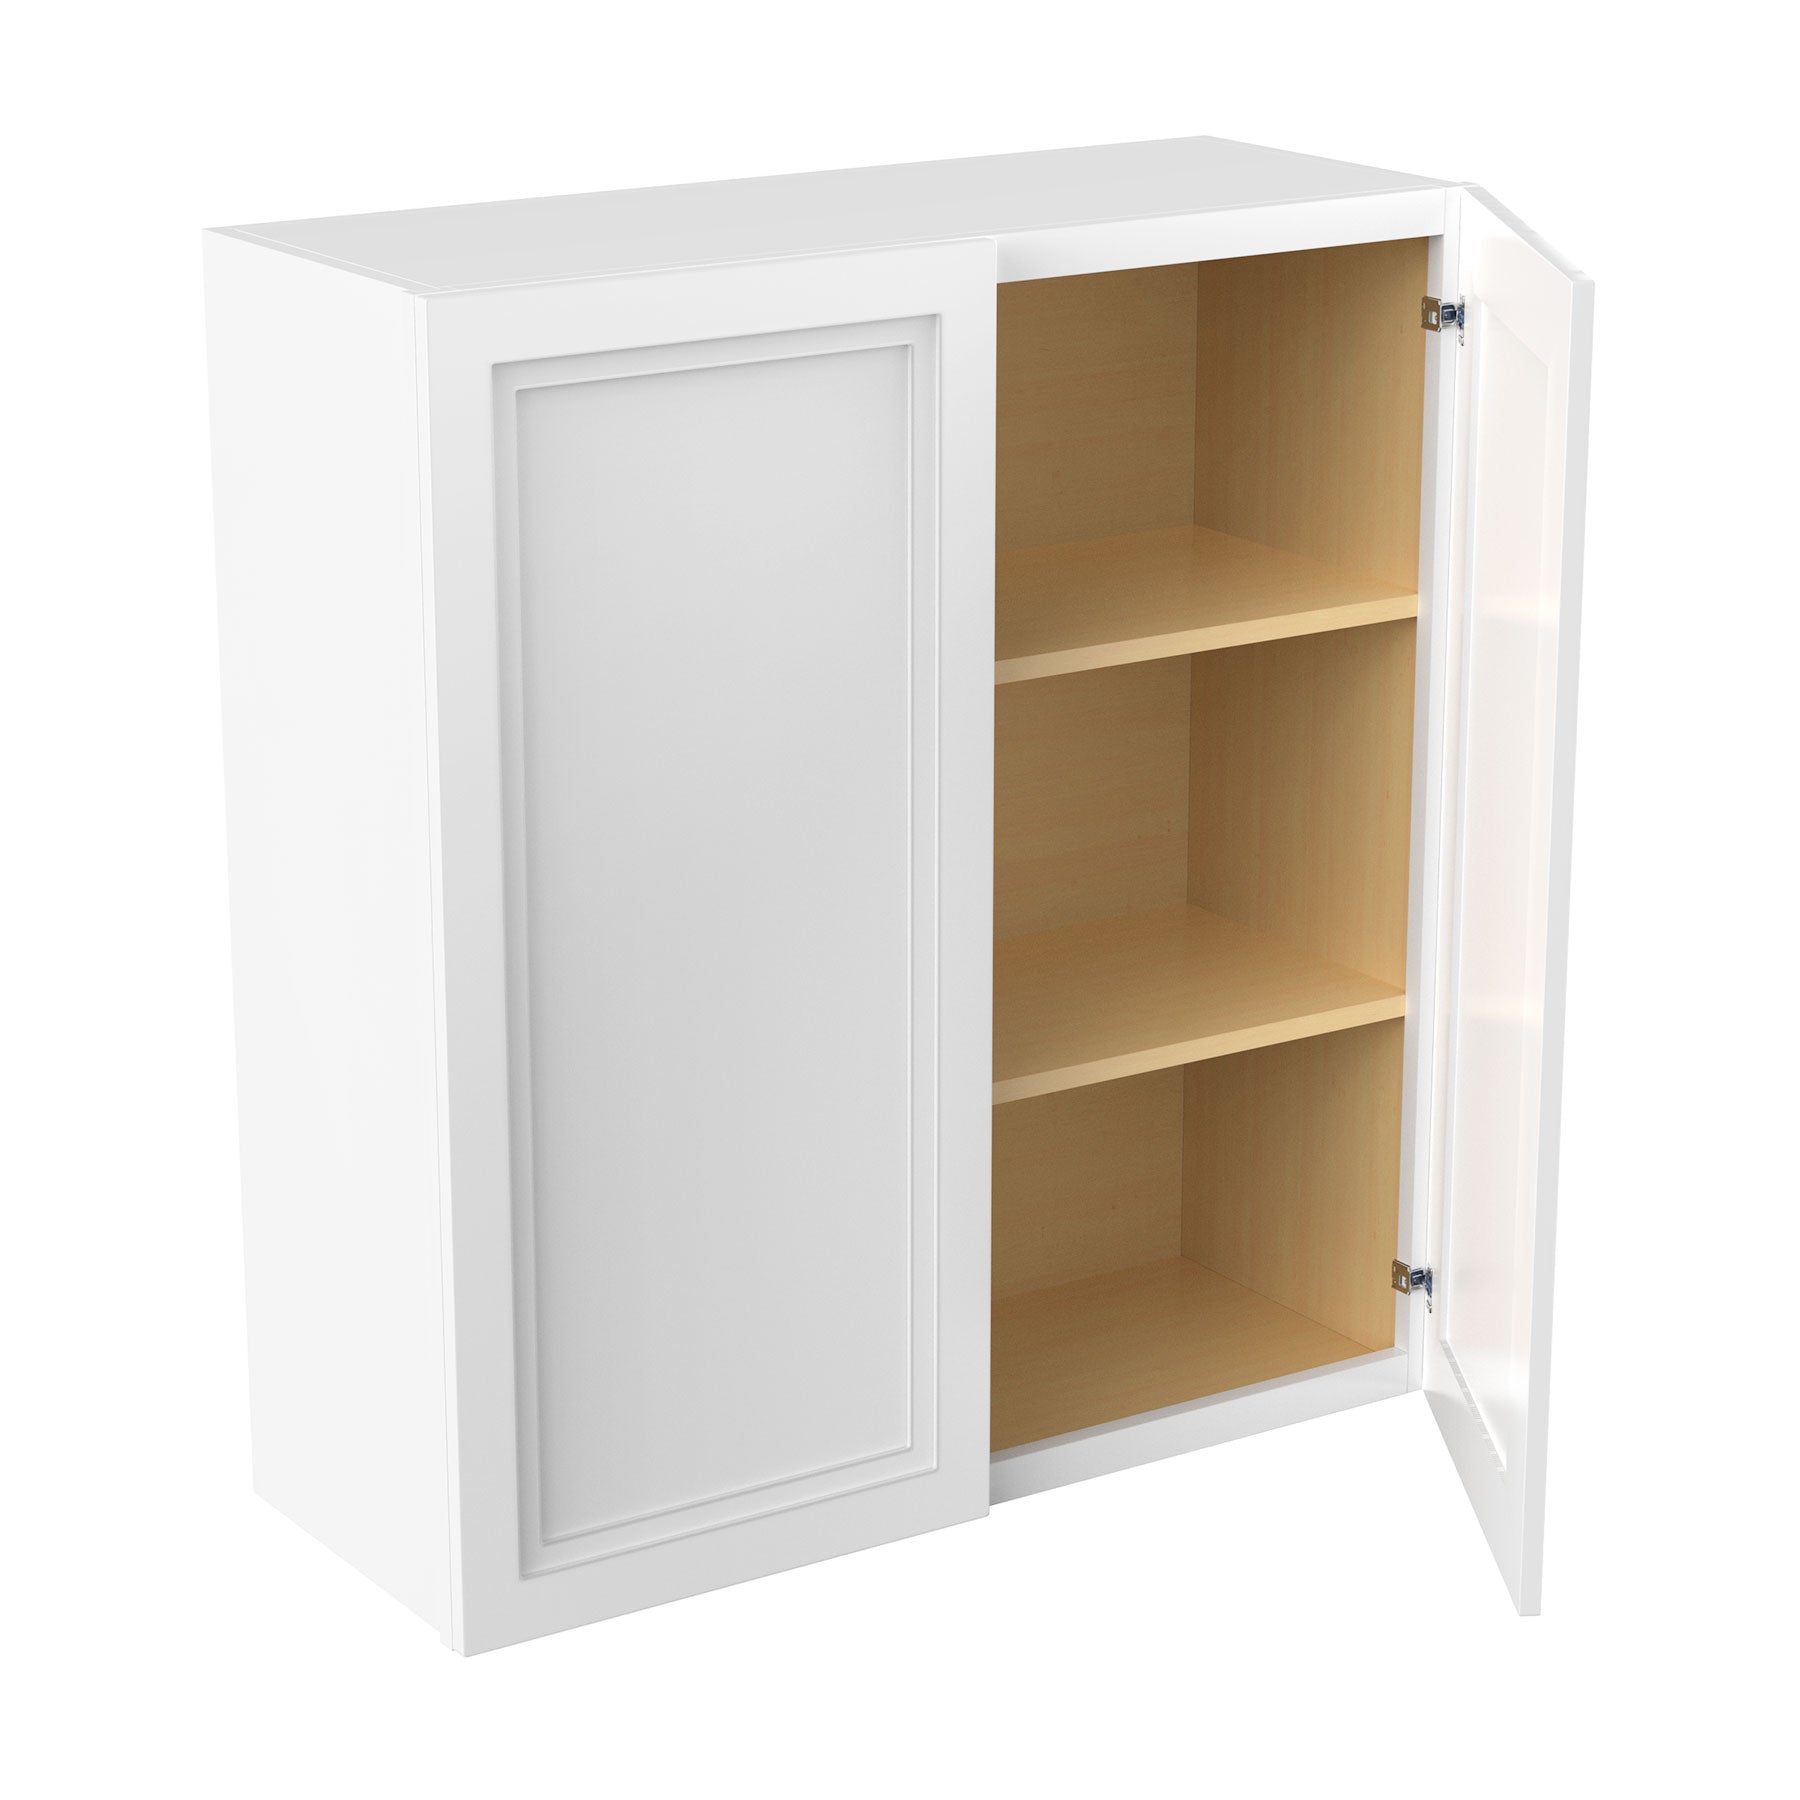 Fashion White - Double Door Wall Cabinet | 33"W x 36"H x 12"D